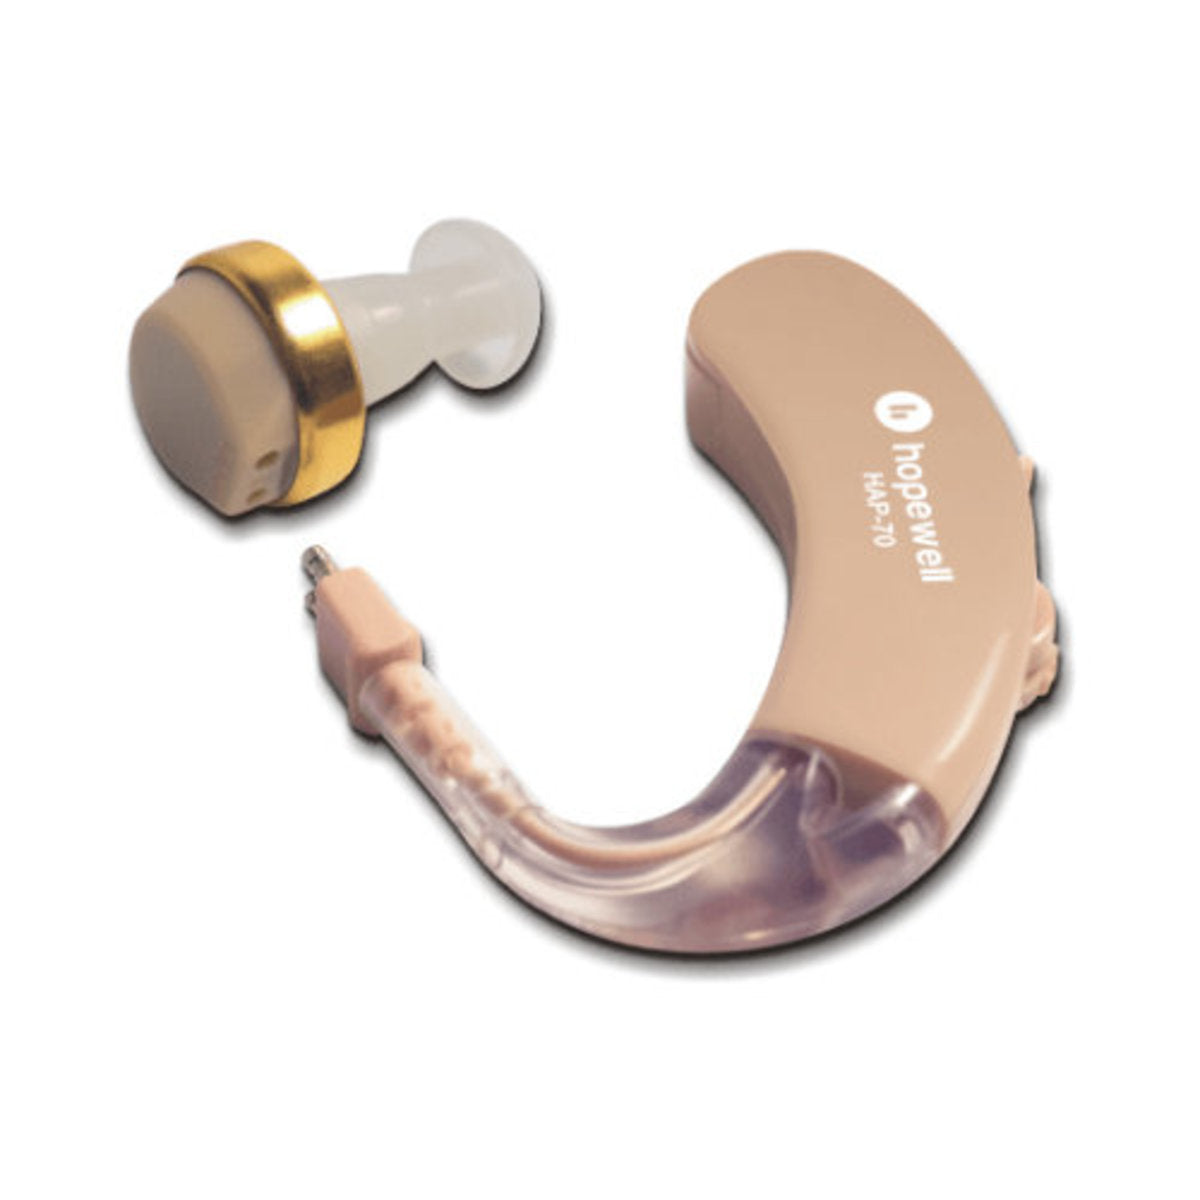 hopewell - HAP-70 (+130dB) over-the-ear hearing aid [Hong Kong licensed]